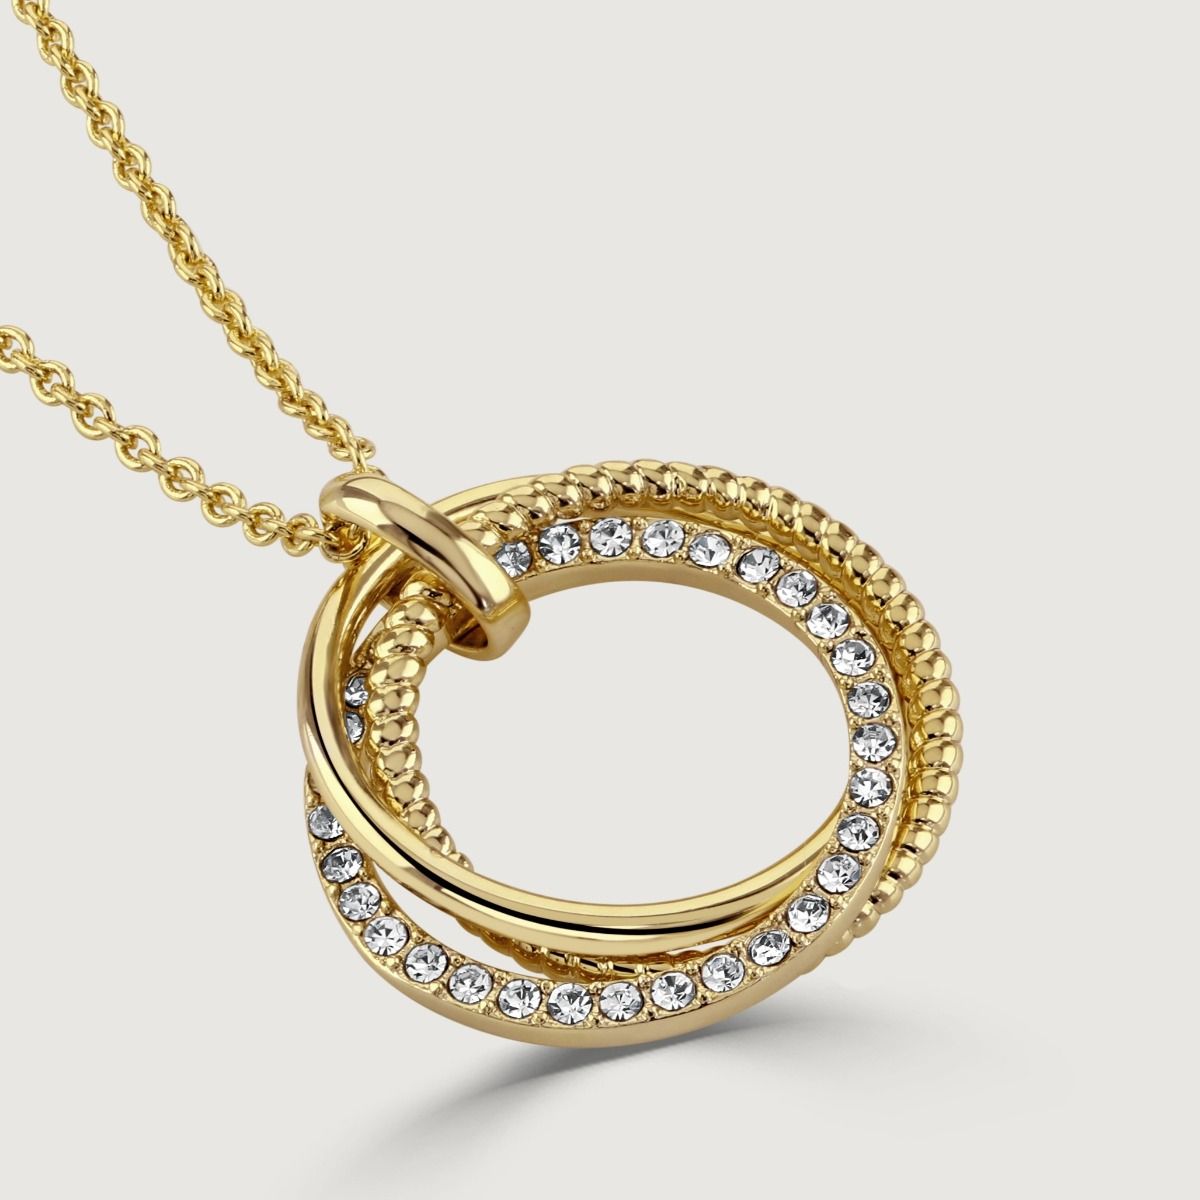 The polished trio hoop pendant presents a contemporary flair with its plain, textured and crystal hoops. Not only does this pendant experiment with texture, but it adds visual appeal. 